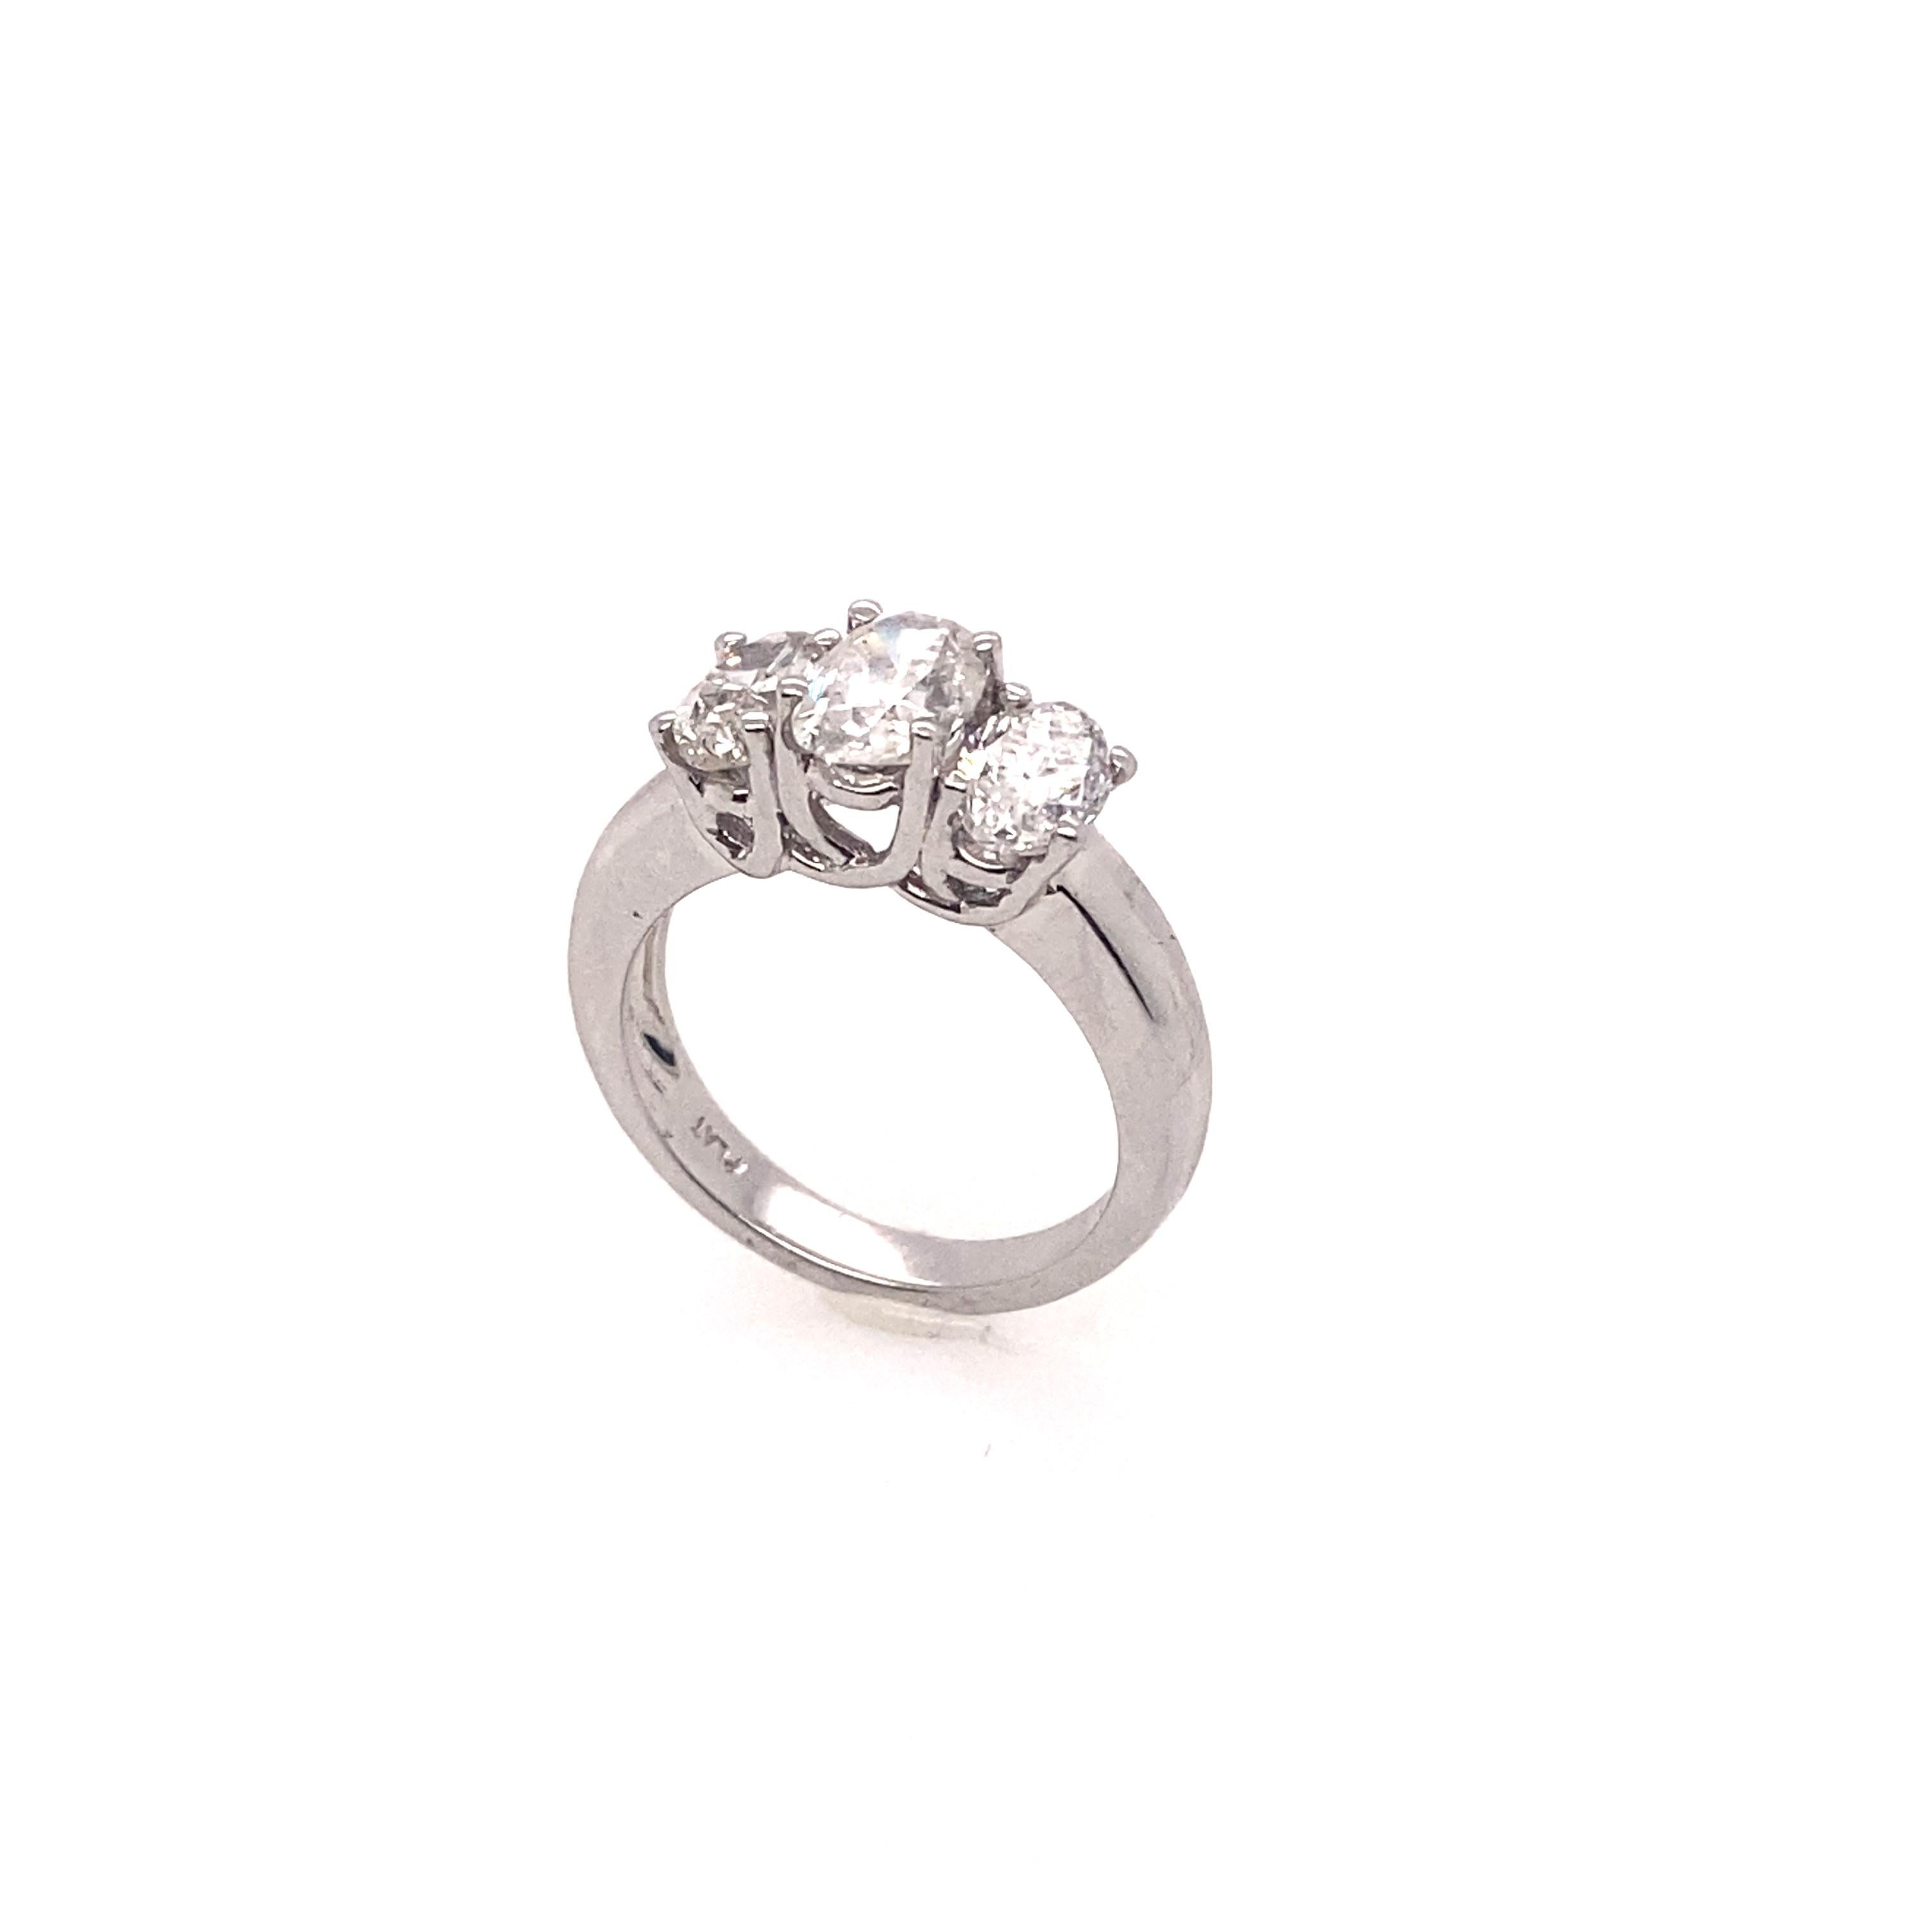 The three oval diamonds are set in the platinum ring. The center oval diamond is EGL certified as a weight of 1.10 carat, F I1 clarity. The ring band is thick and it gives the powerful and elegant impressions. It is very perfect for who loves the